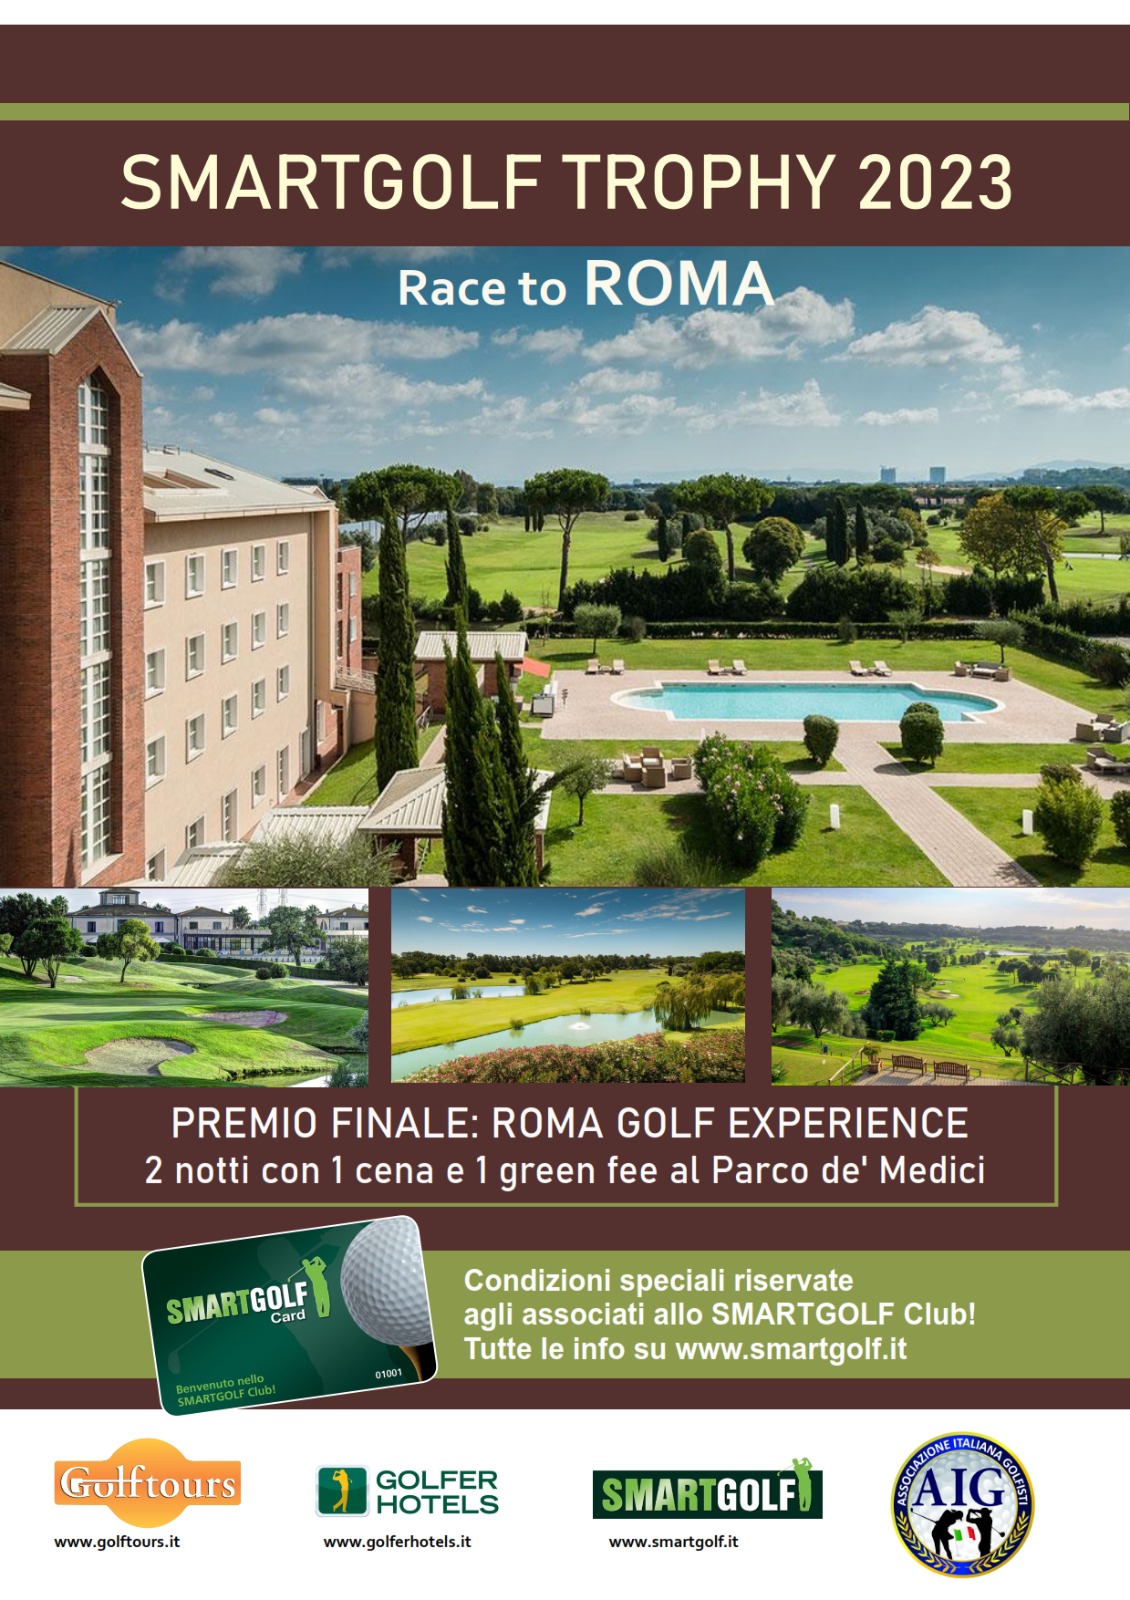 Smartgolf Trophy, Race to Roma 2023